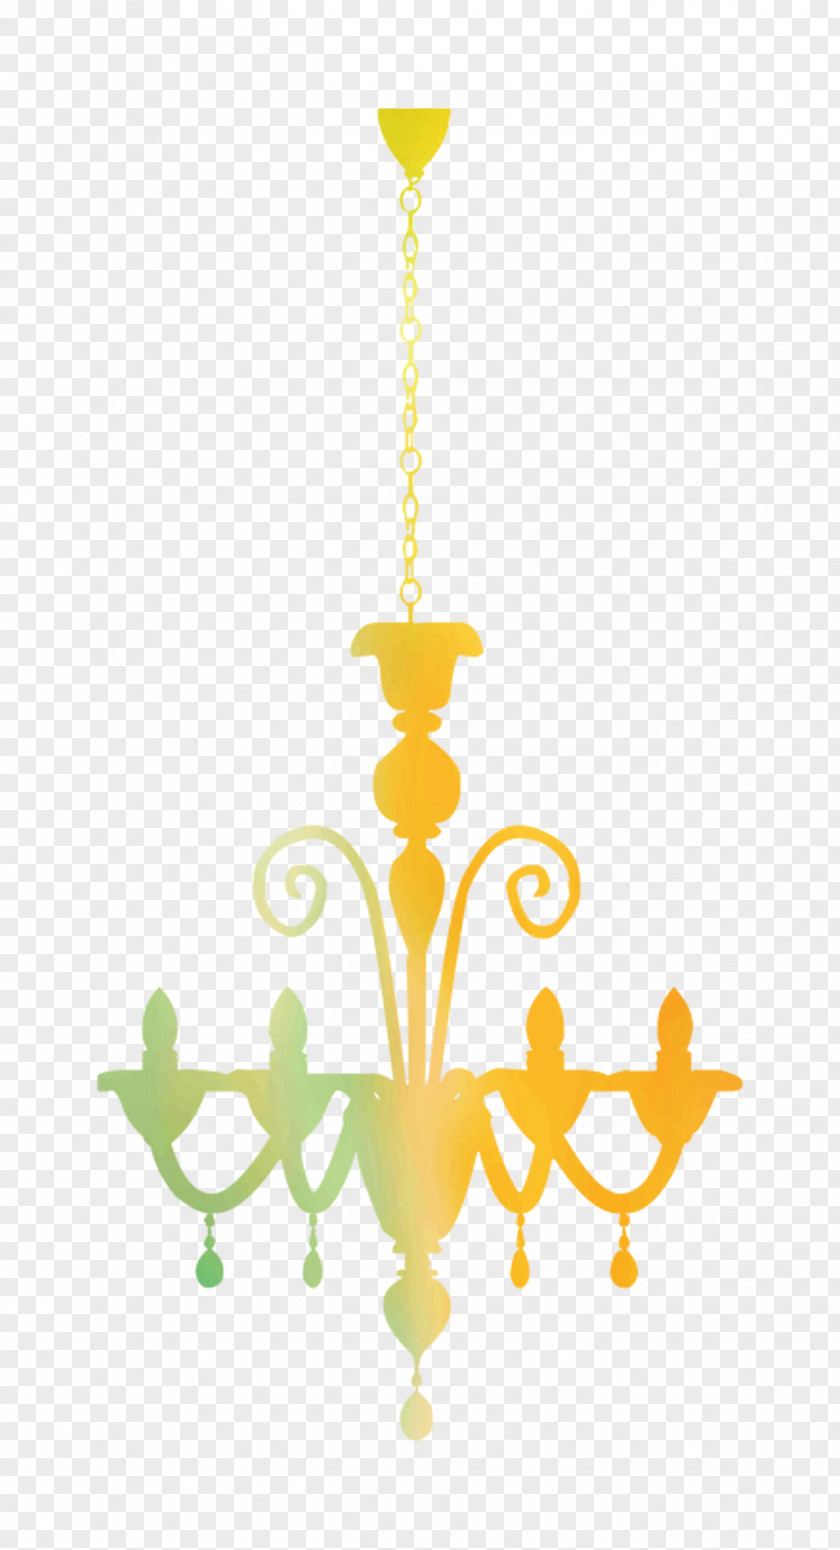 Chandelier Ceiling Fixture Product Candle Yellow PNG